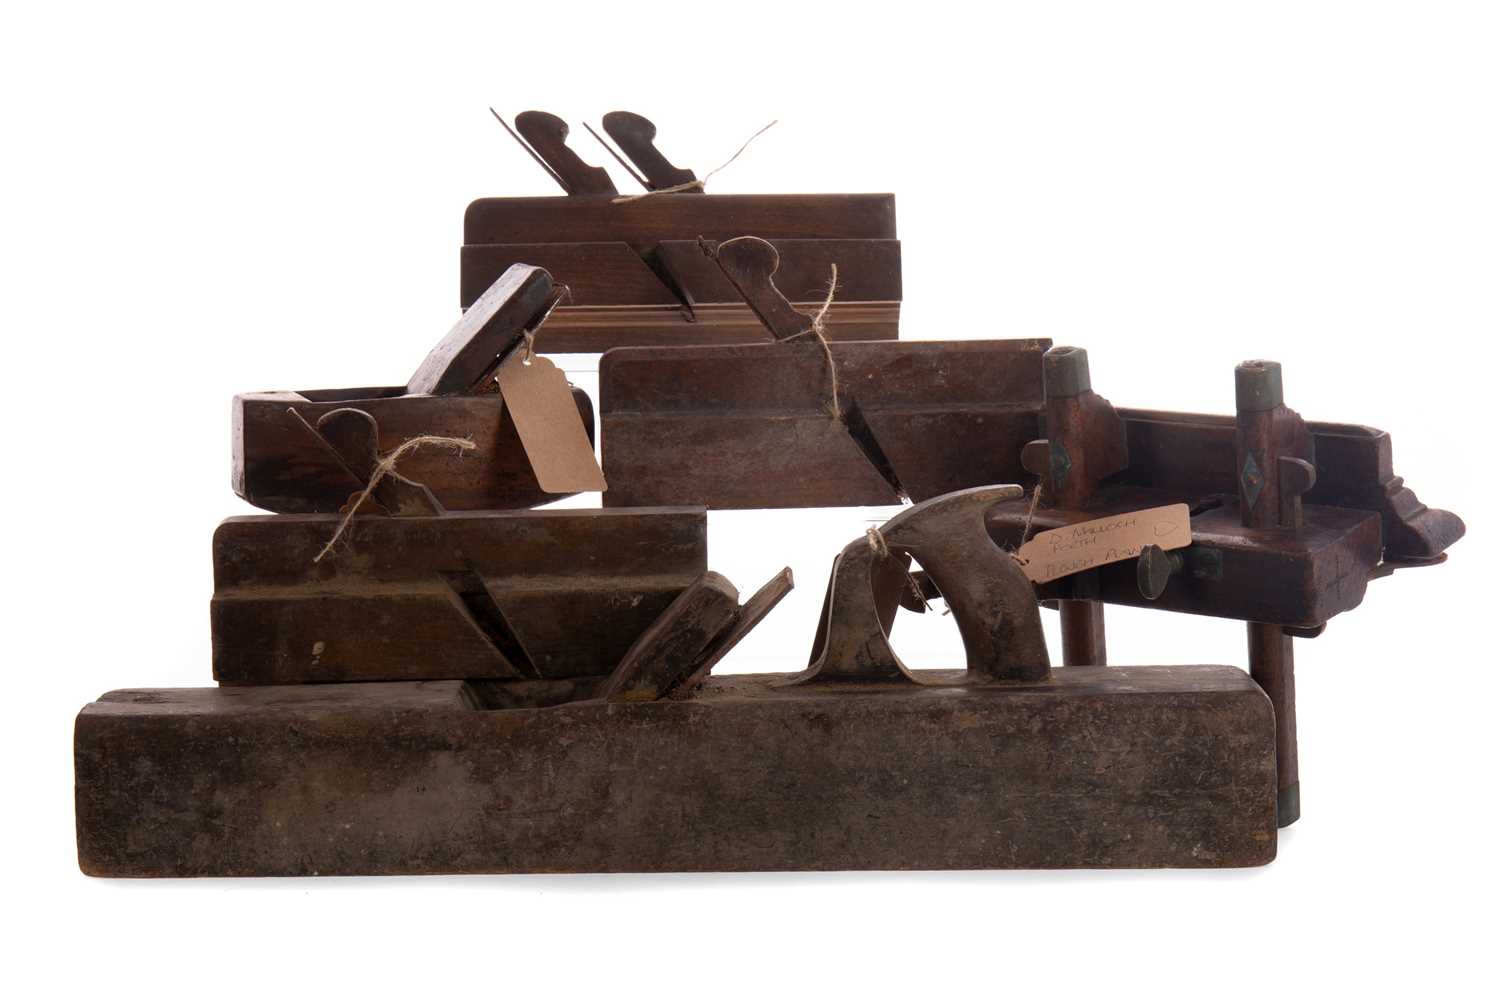 Lot 638 - D. MALLOCH OF PERTH PLOUGH PLANE AND OTHER WOODWORKING PLANES